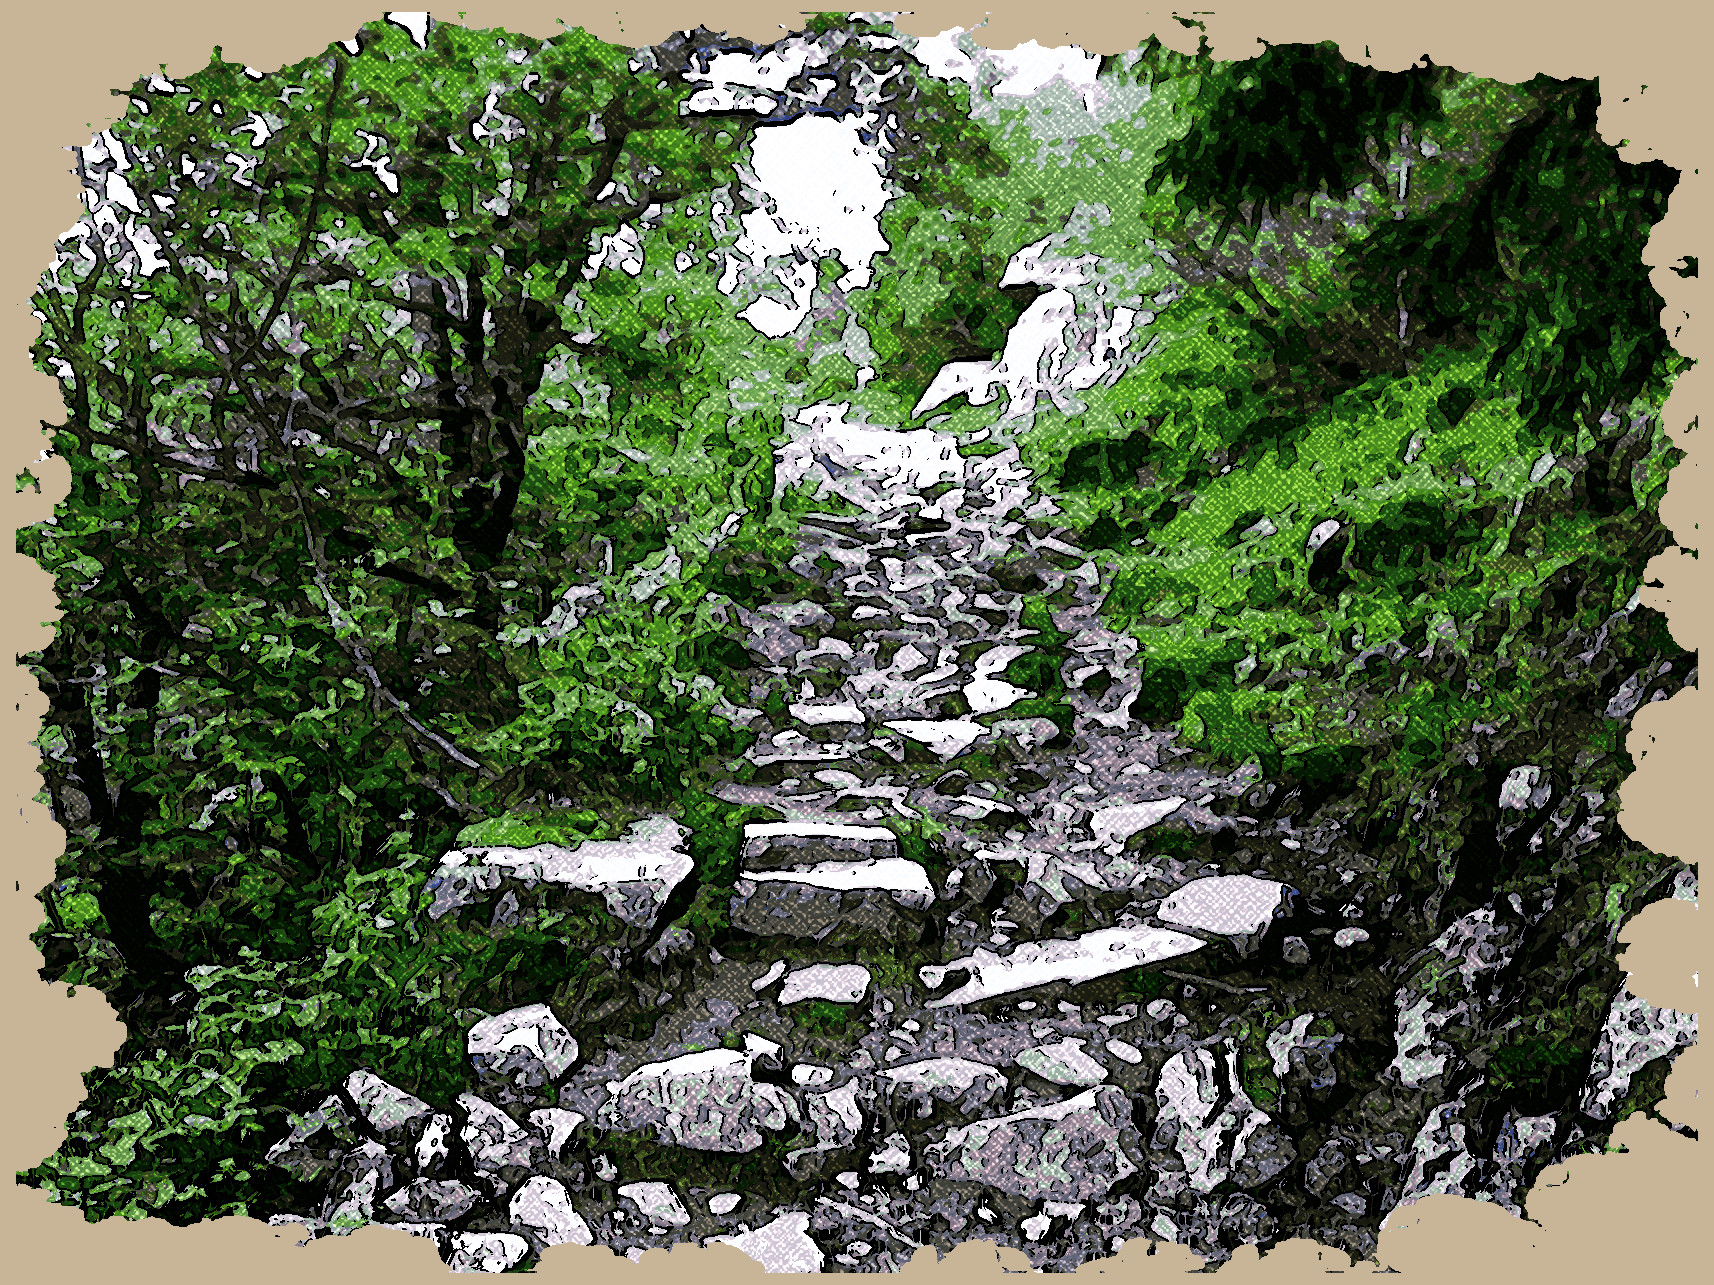 2022-04-12 06-25-42stock_anita_creation_chemin_de_pierre_by_anita_creations_de016zv-fullview as a drawing with texture coloree.jpeg